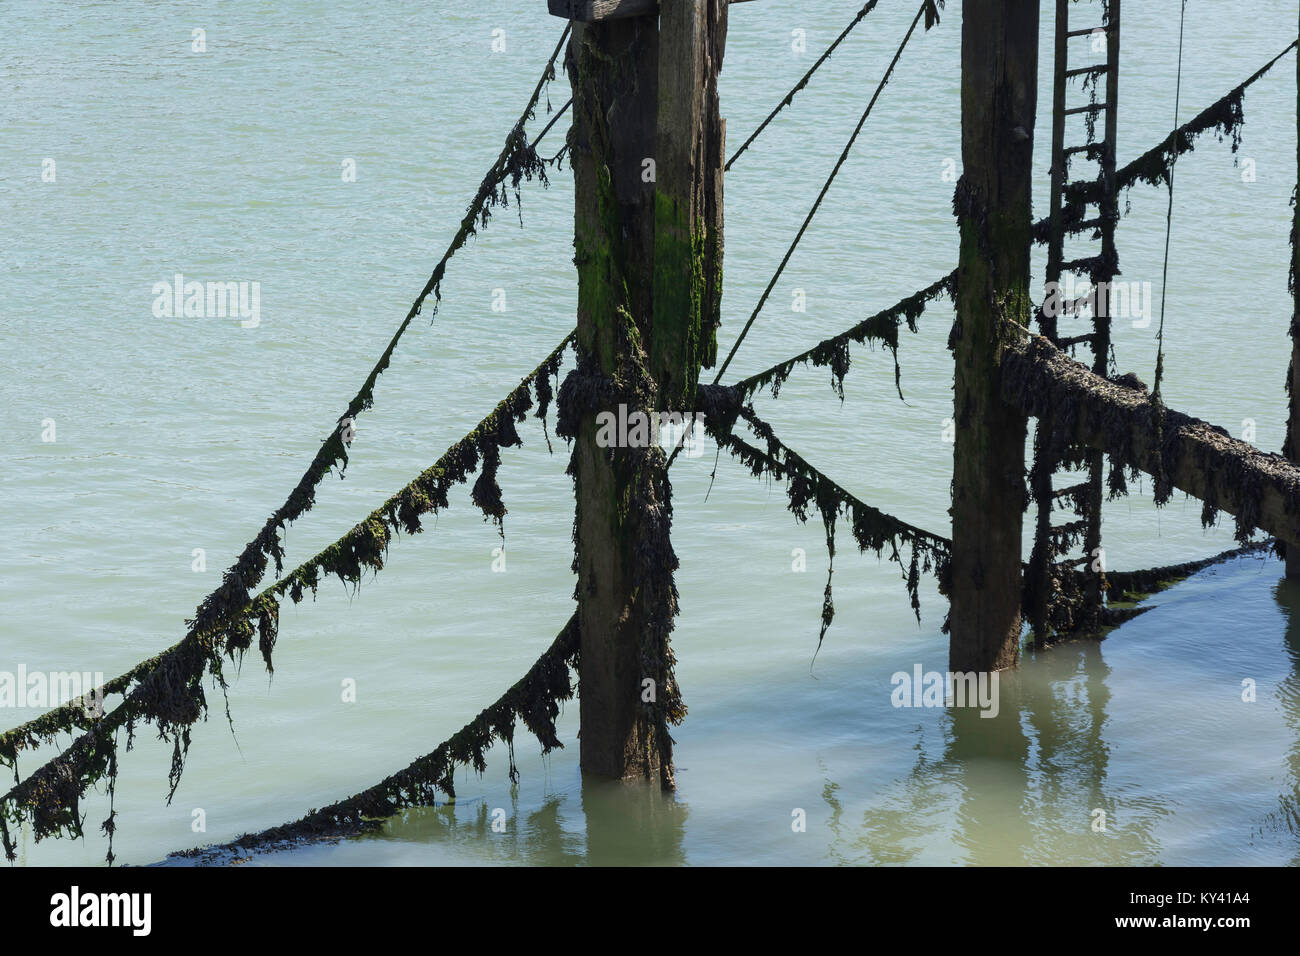 Seaweed-covered ropes, pylons and ladder on West Quay, Newhaven, East Sussex, England, United Kingdom Stock Photo